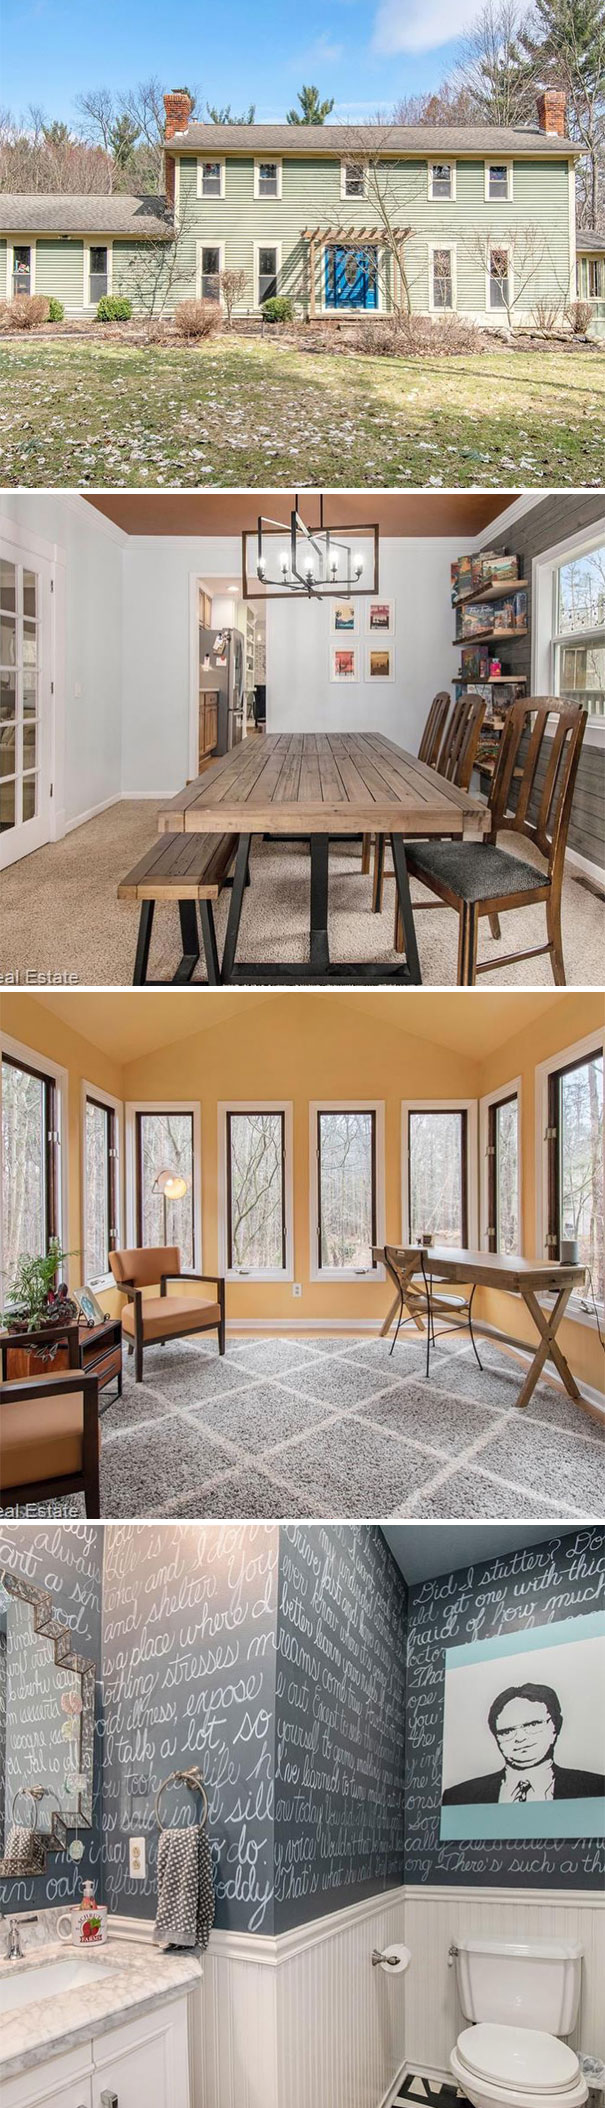 Whenever I'm About To Do Something, I Think 'Would An Idiot Do That?' And If They Would, I Do Not Do That Thing. $475,000. 4 Bd, 3 Ba. 2,509 Sq Ft. 5 Acres